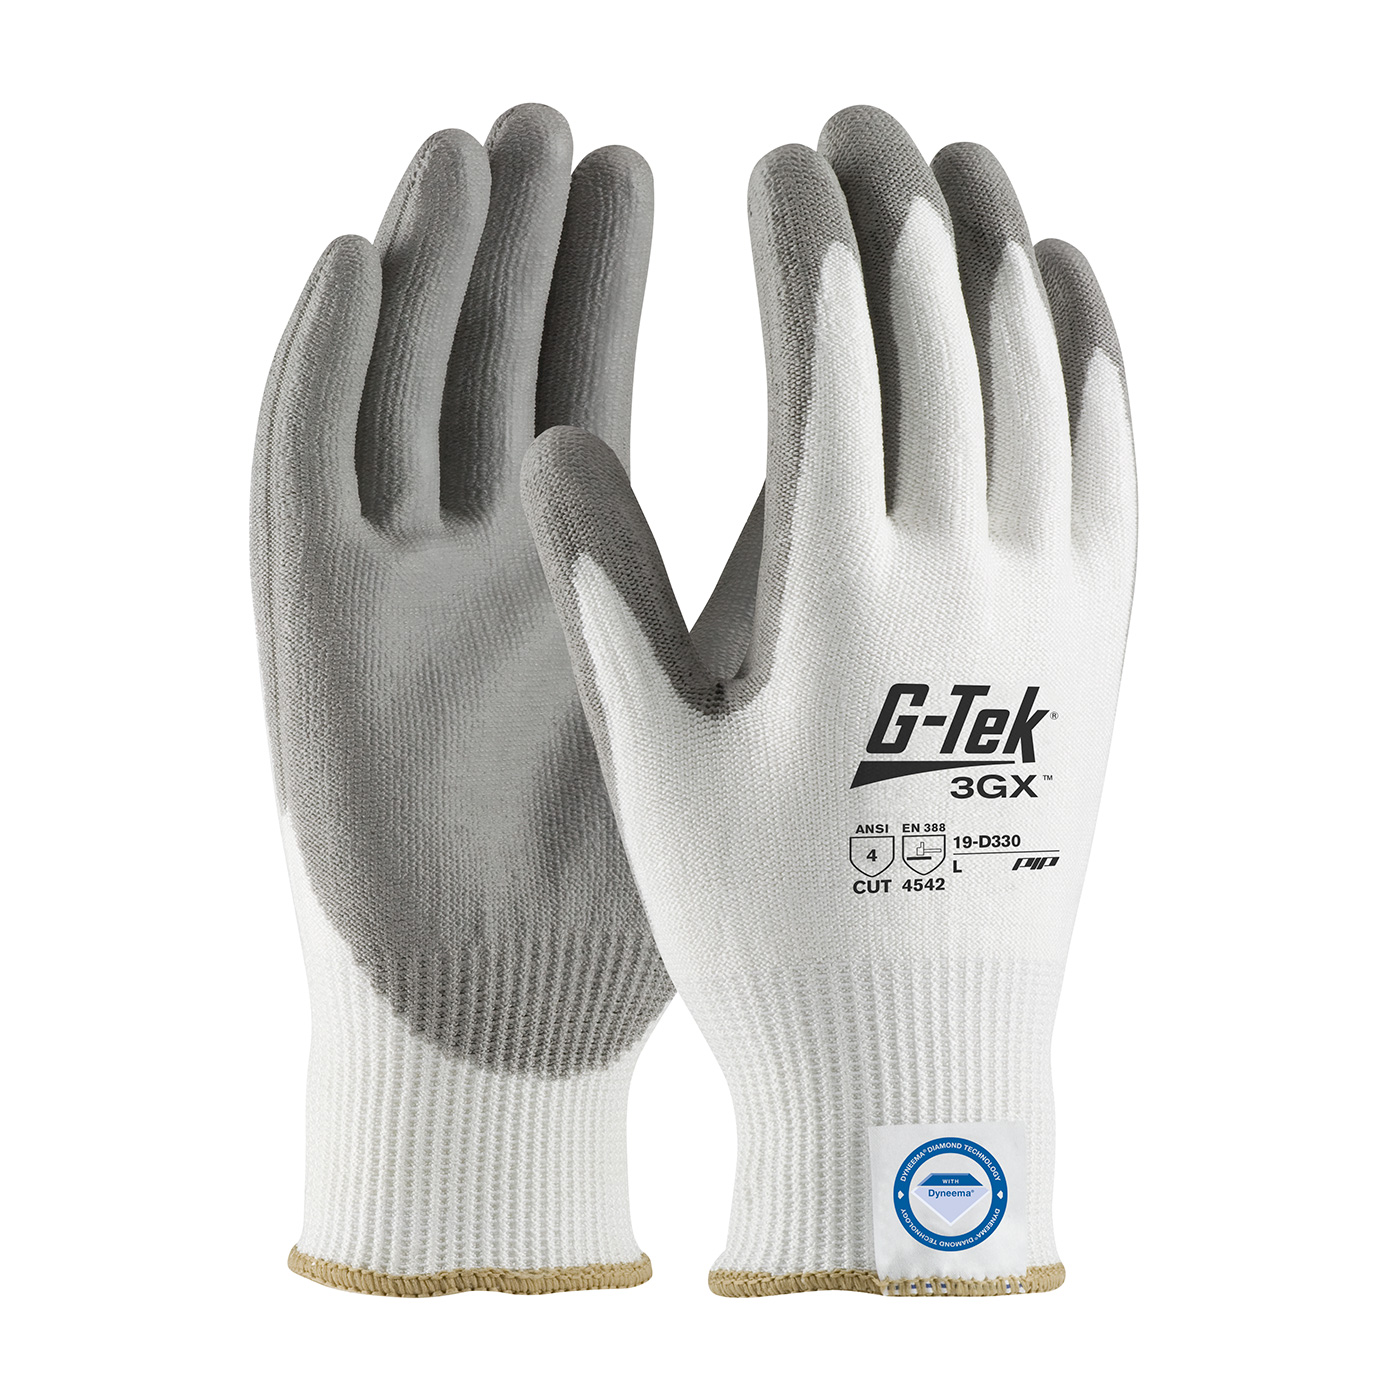 PIP 19-D330/S G-Tek 3GX Seamless Knit Dyneema Diamond Blended Glove with Polyurethane Coated Smooth Grip on Palm & Fingers - Small PID-19 D330 S